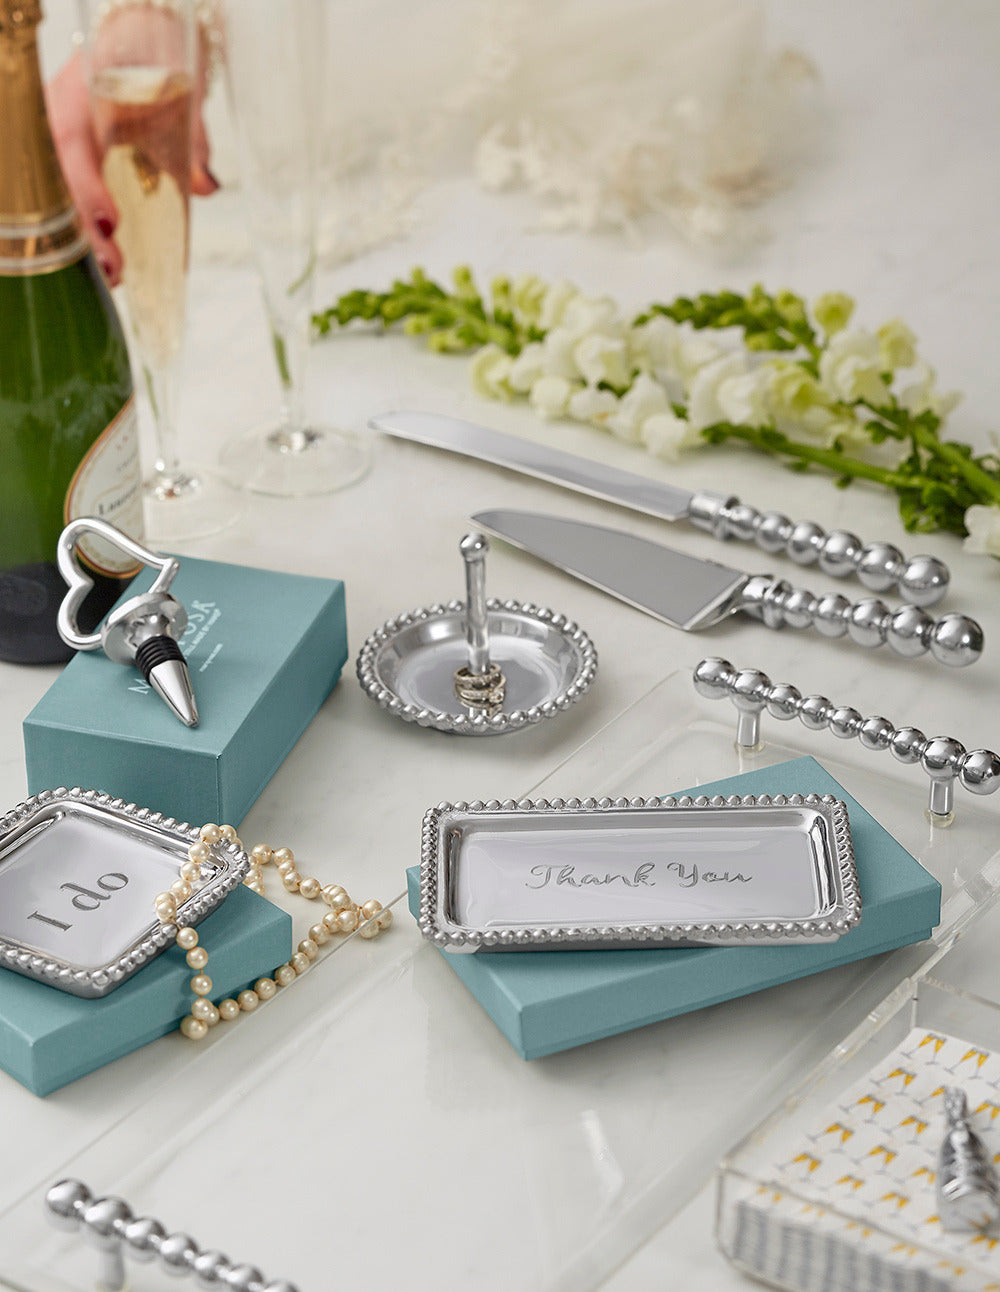 Great Wedding Gifts for the Bride to Be